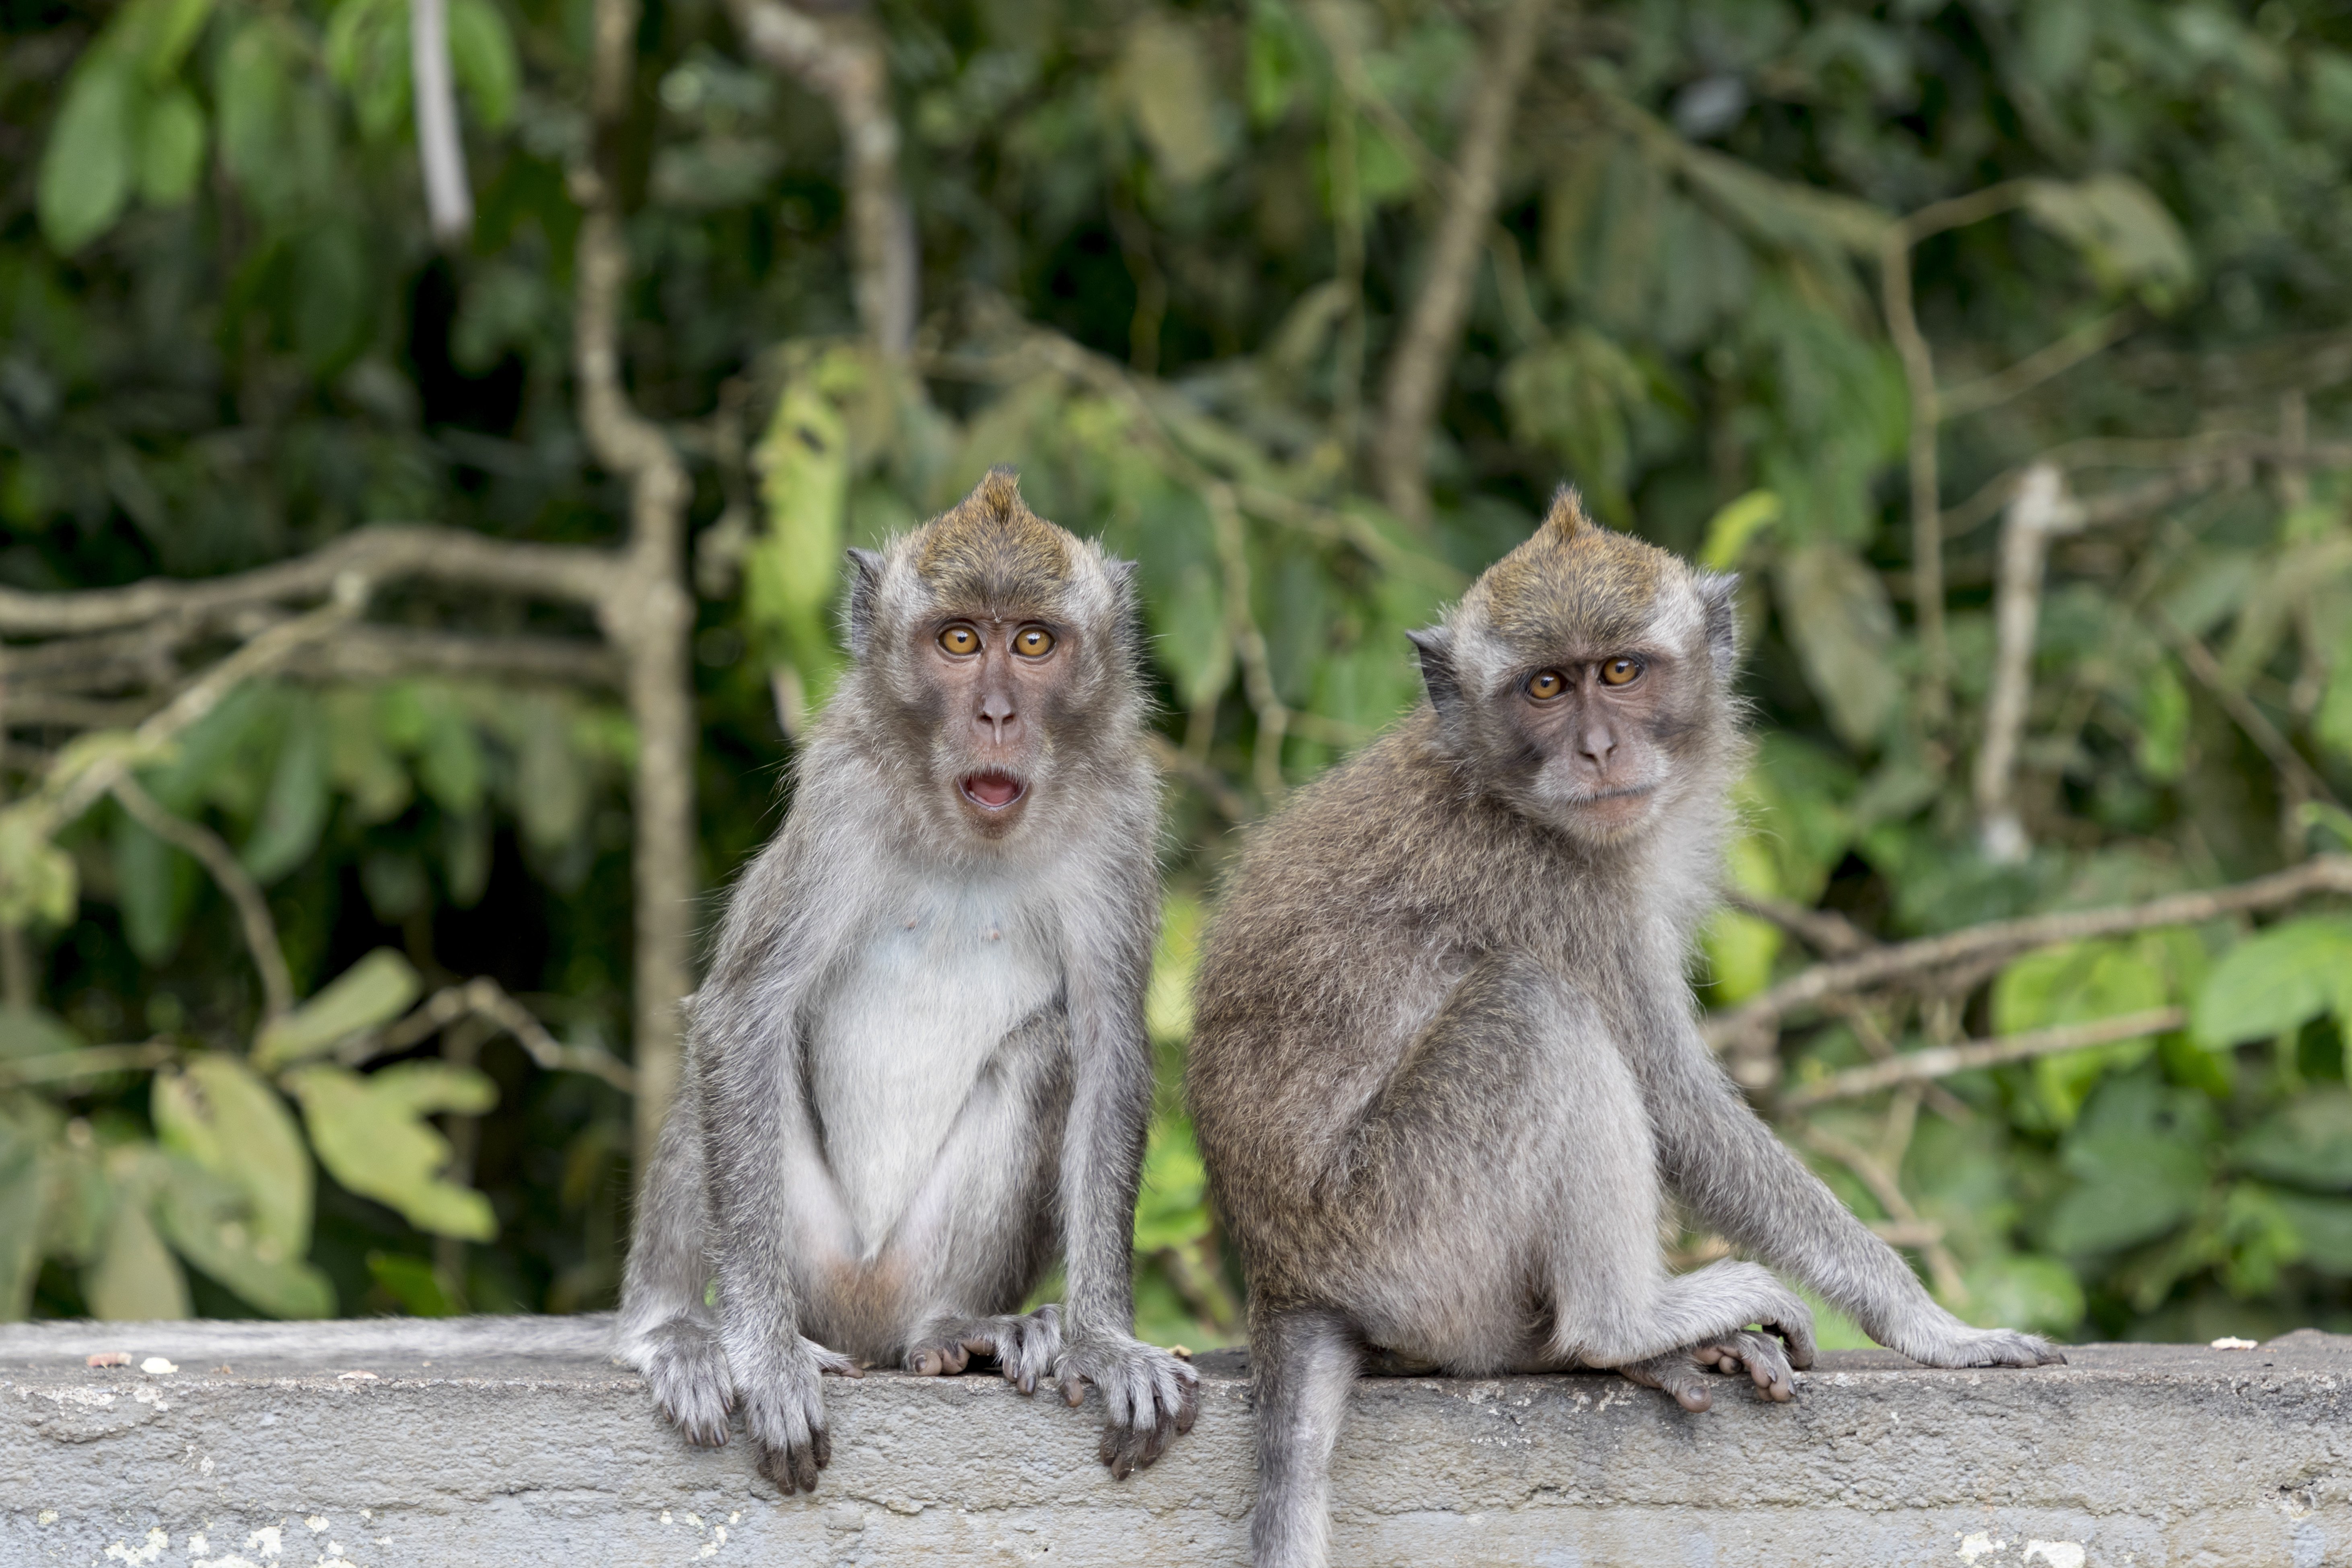 two long-tailed monkeys amid a forest